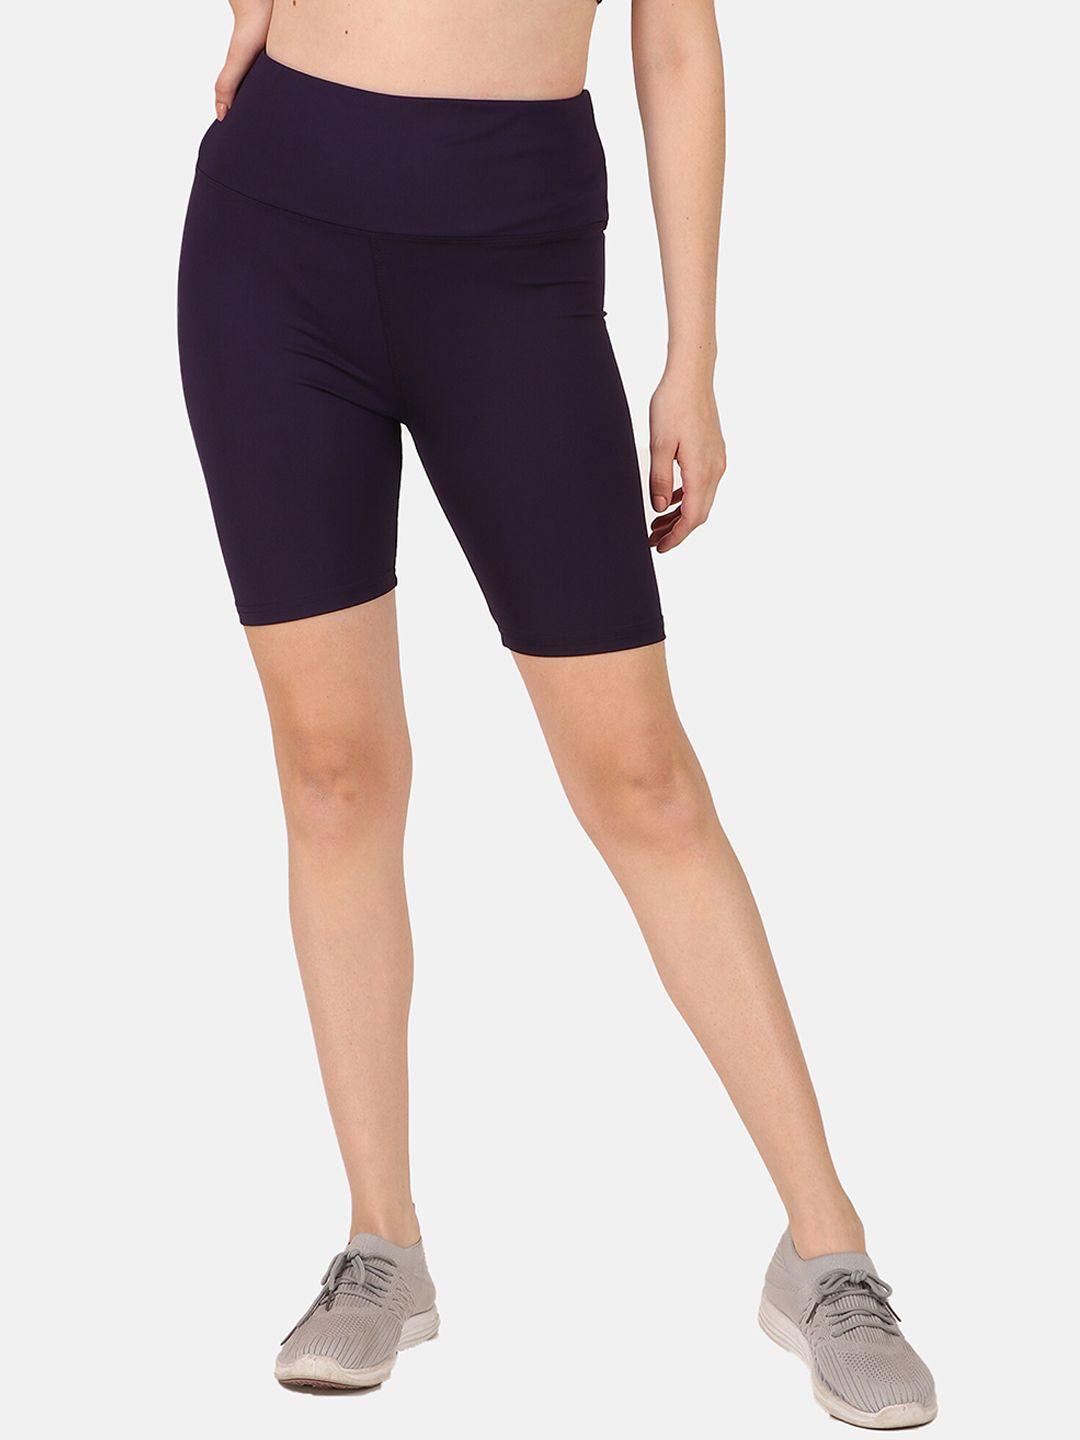 fitinc-women-violet-skinny-fit-high-rise-training-or-gym-sports-shorts